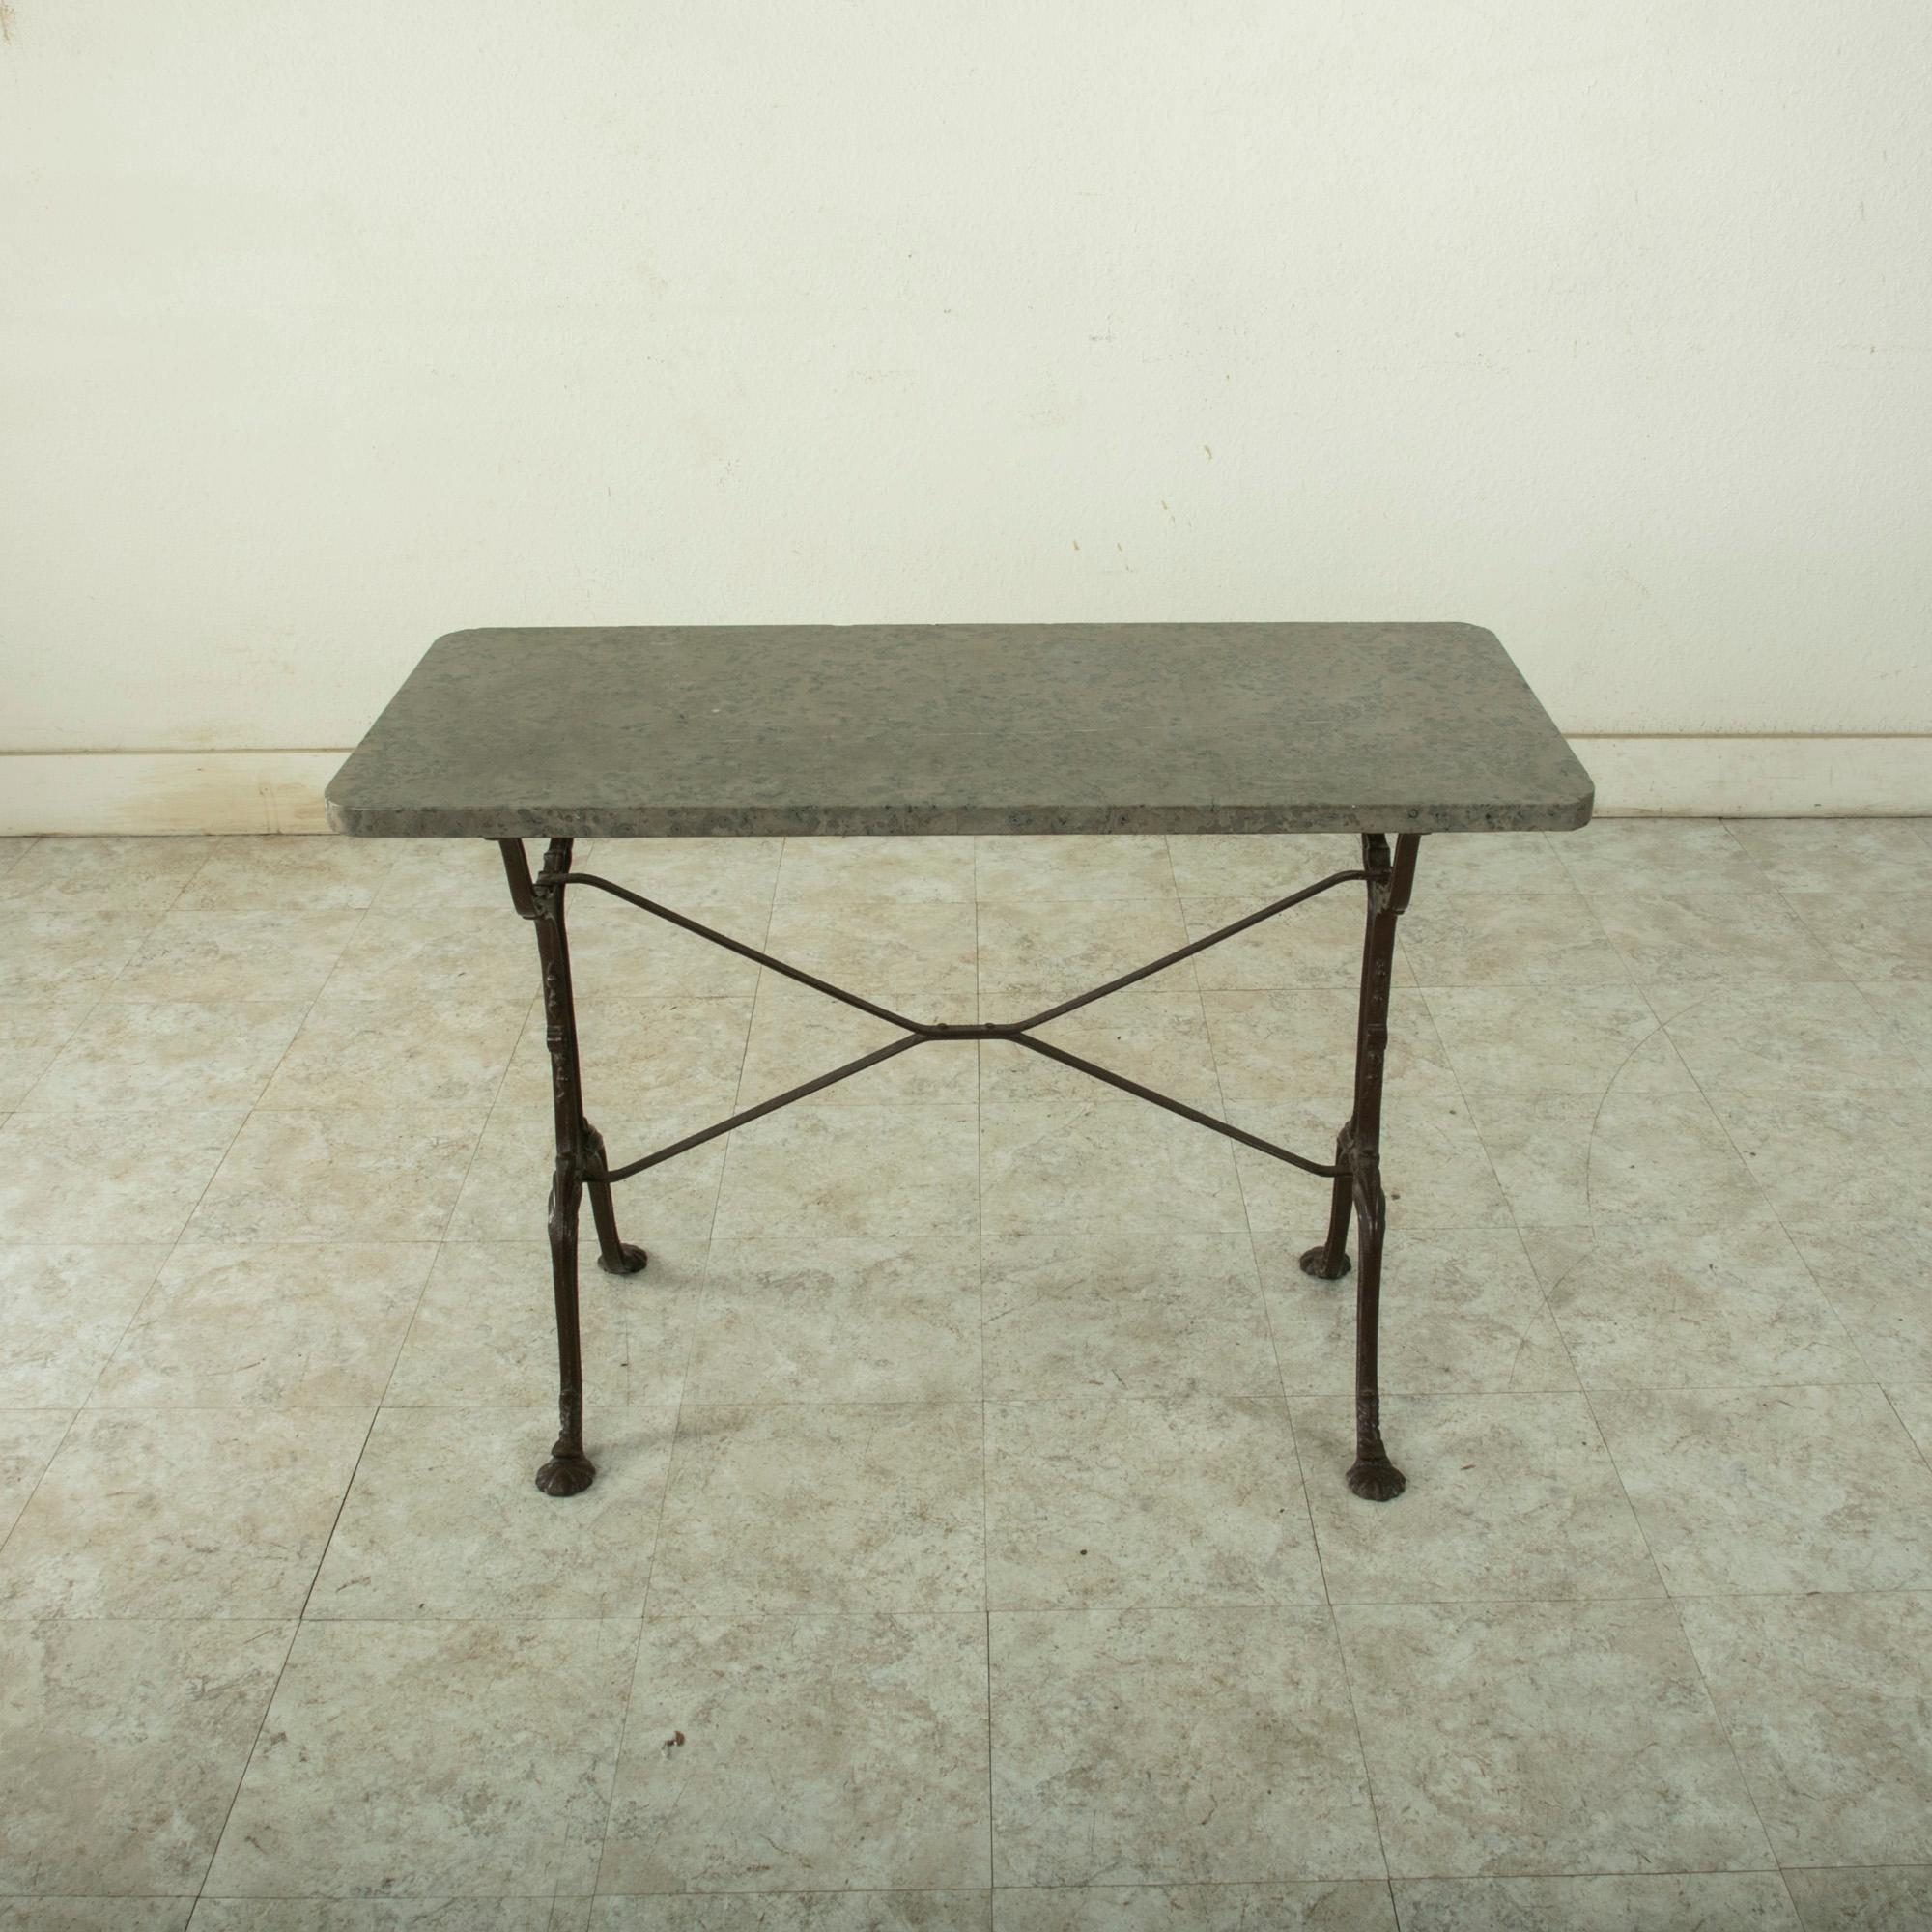 Originally used in a French brasserie during the early-twentieth century, this cast iron bistro table or cafe table features a solid grey marble top. Scrolled iron legs support the top and are joined by an X-stretcher that provides additional